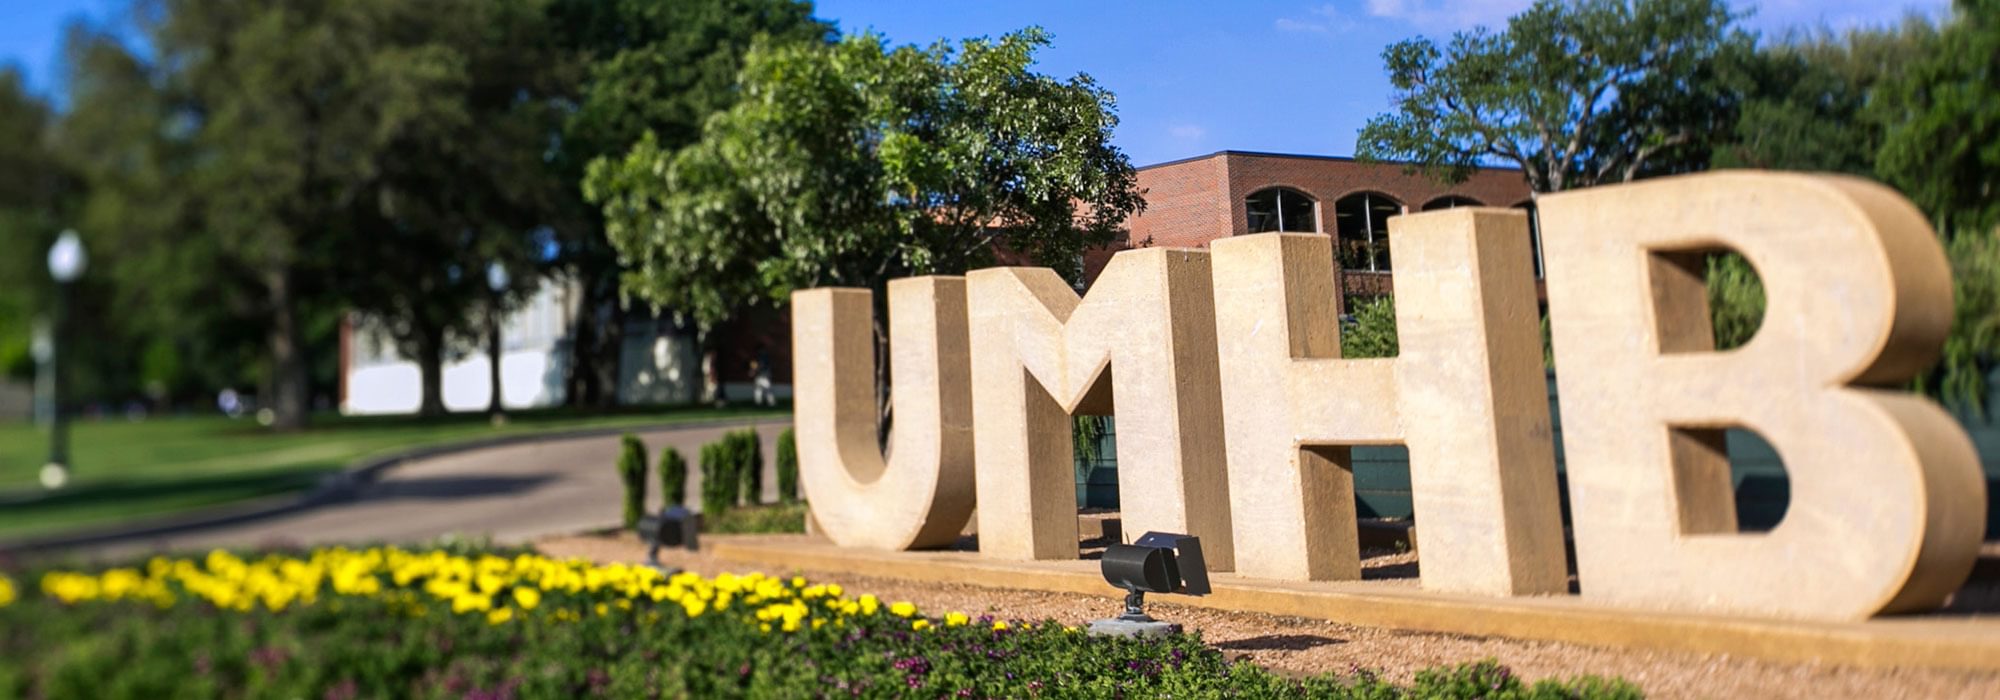 UMHB To Open Tuesday Under Normal Operations